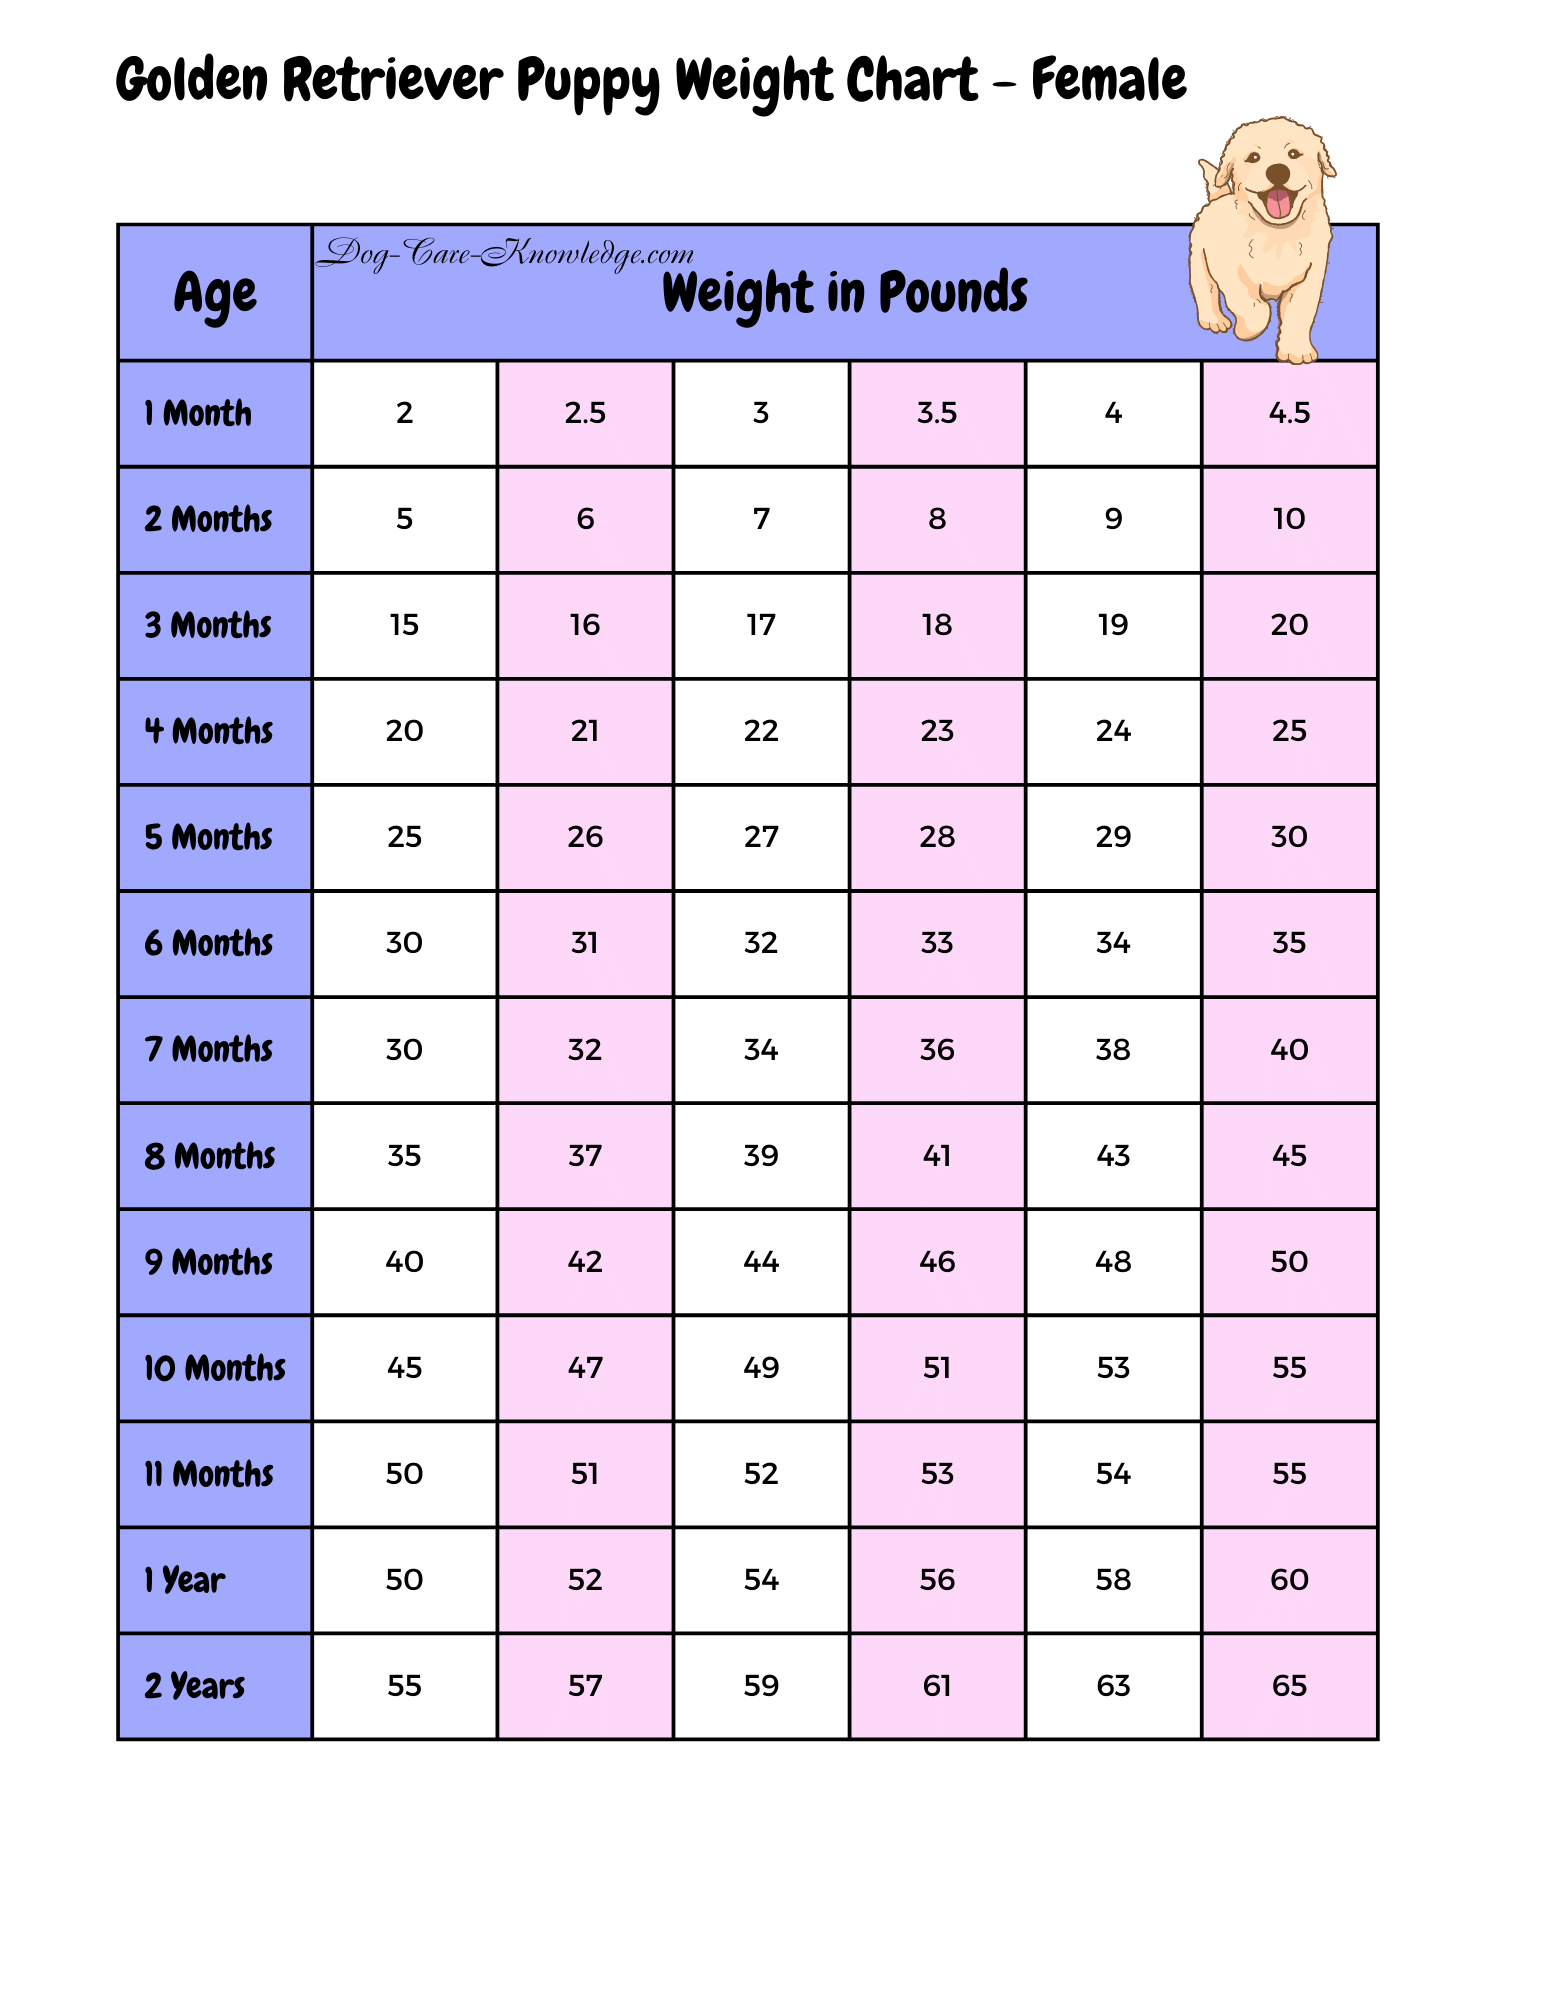 https://www.dog-care-knowledge.com/images/img-golden-retriever-puppy-weight-chart-female.png